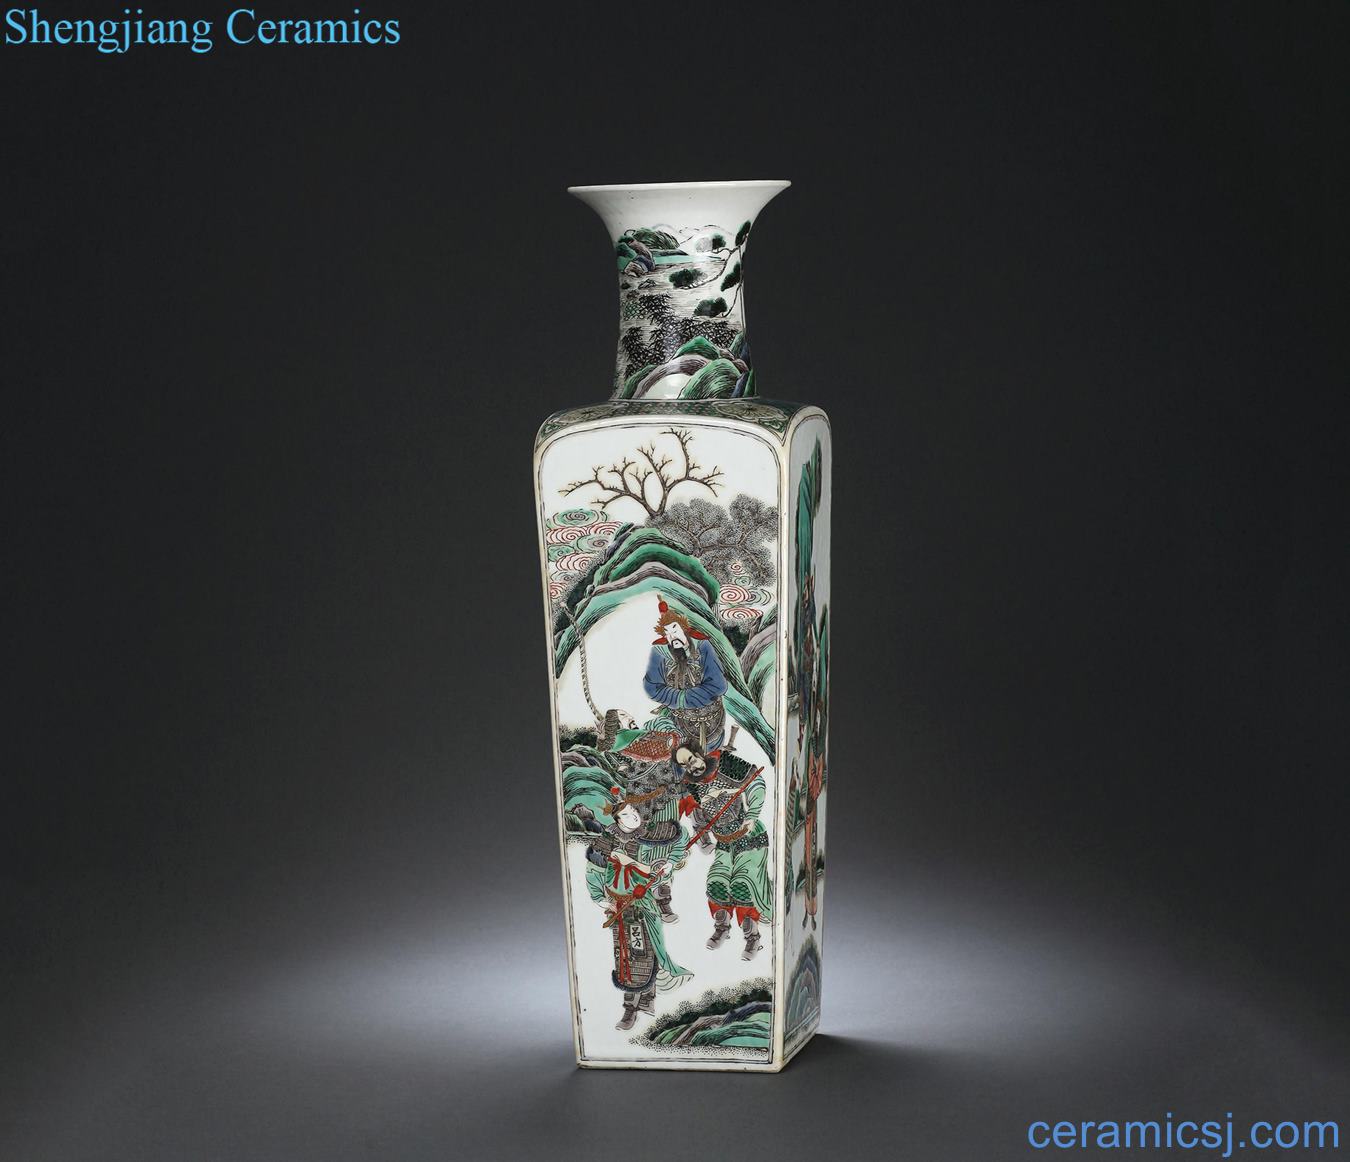 The qing emperor kangxi colorful stories of bottle